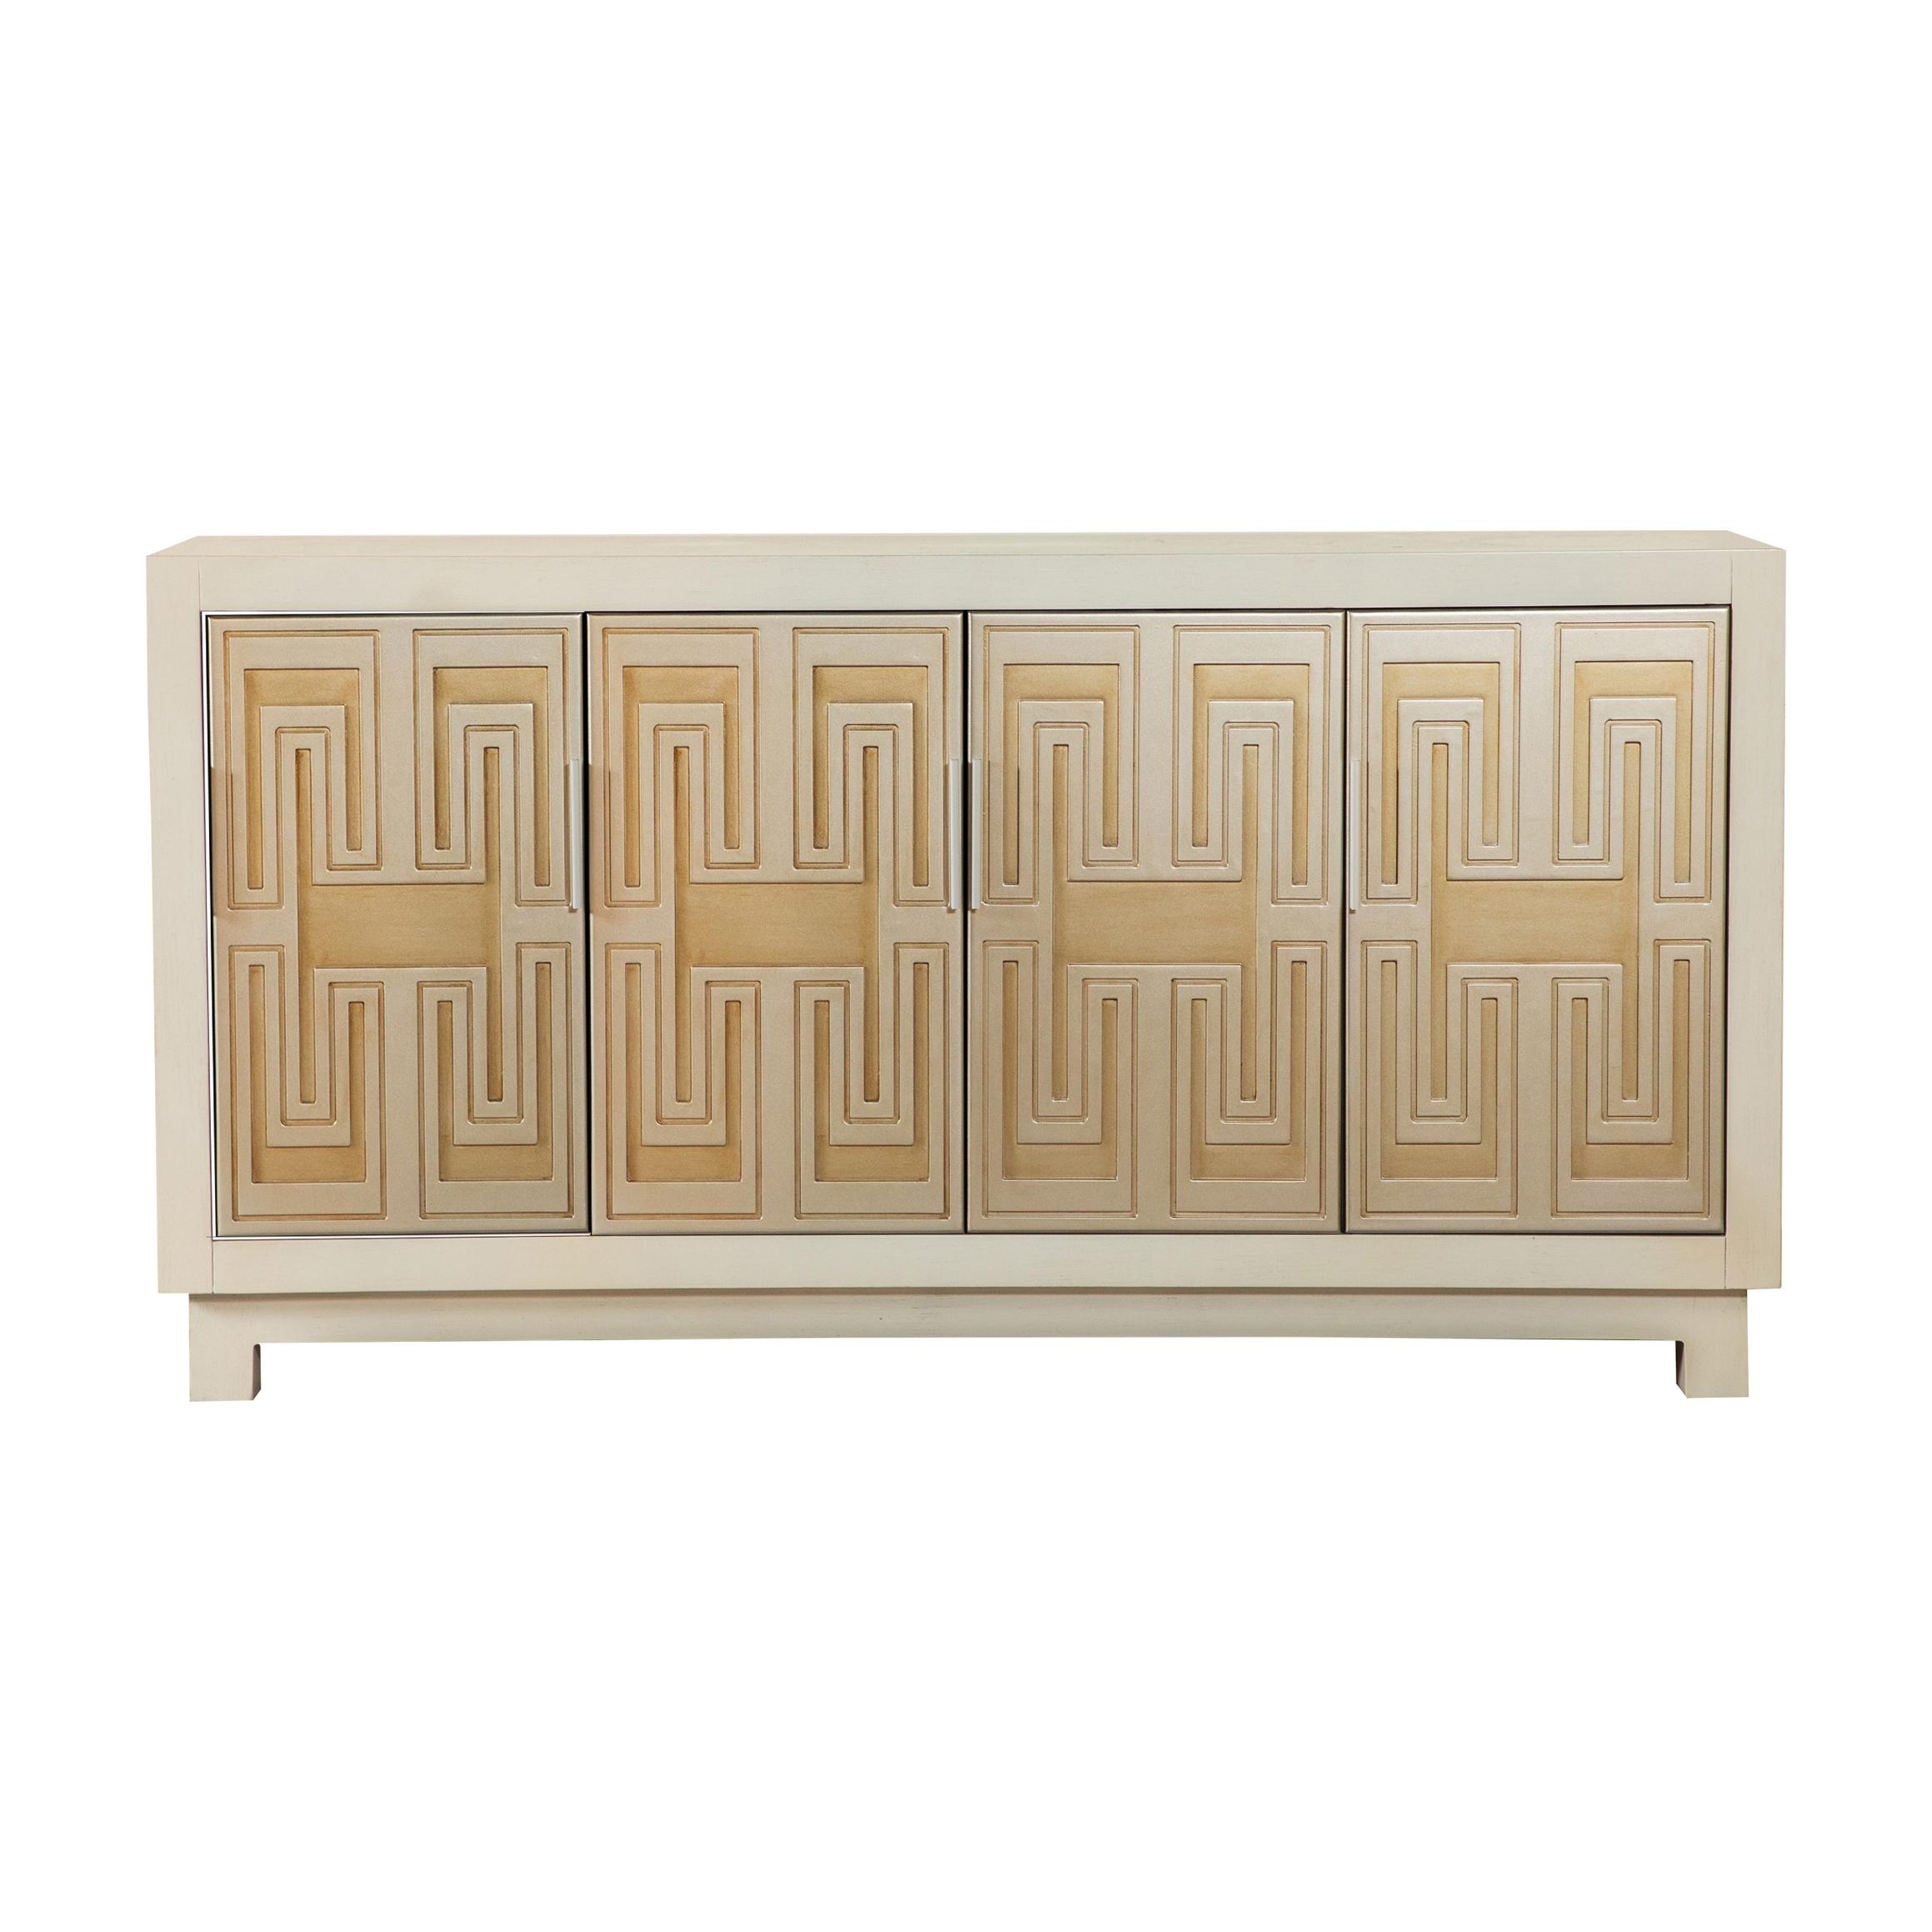 Contemporary Accent Cabinet 953416 953416 in White, Gold 